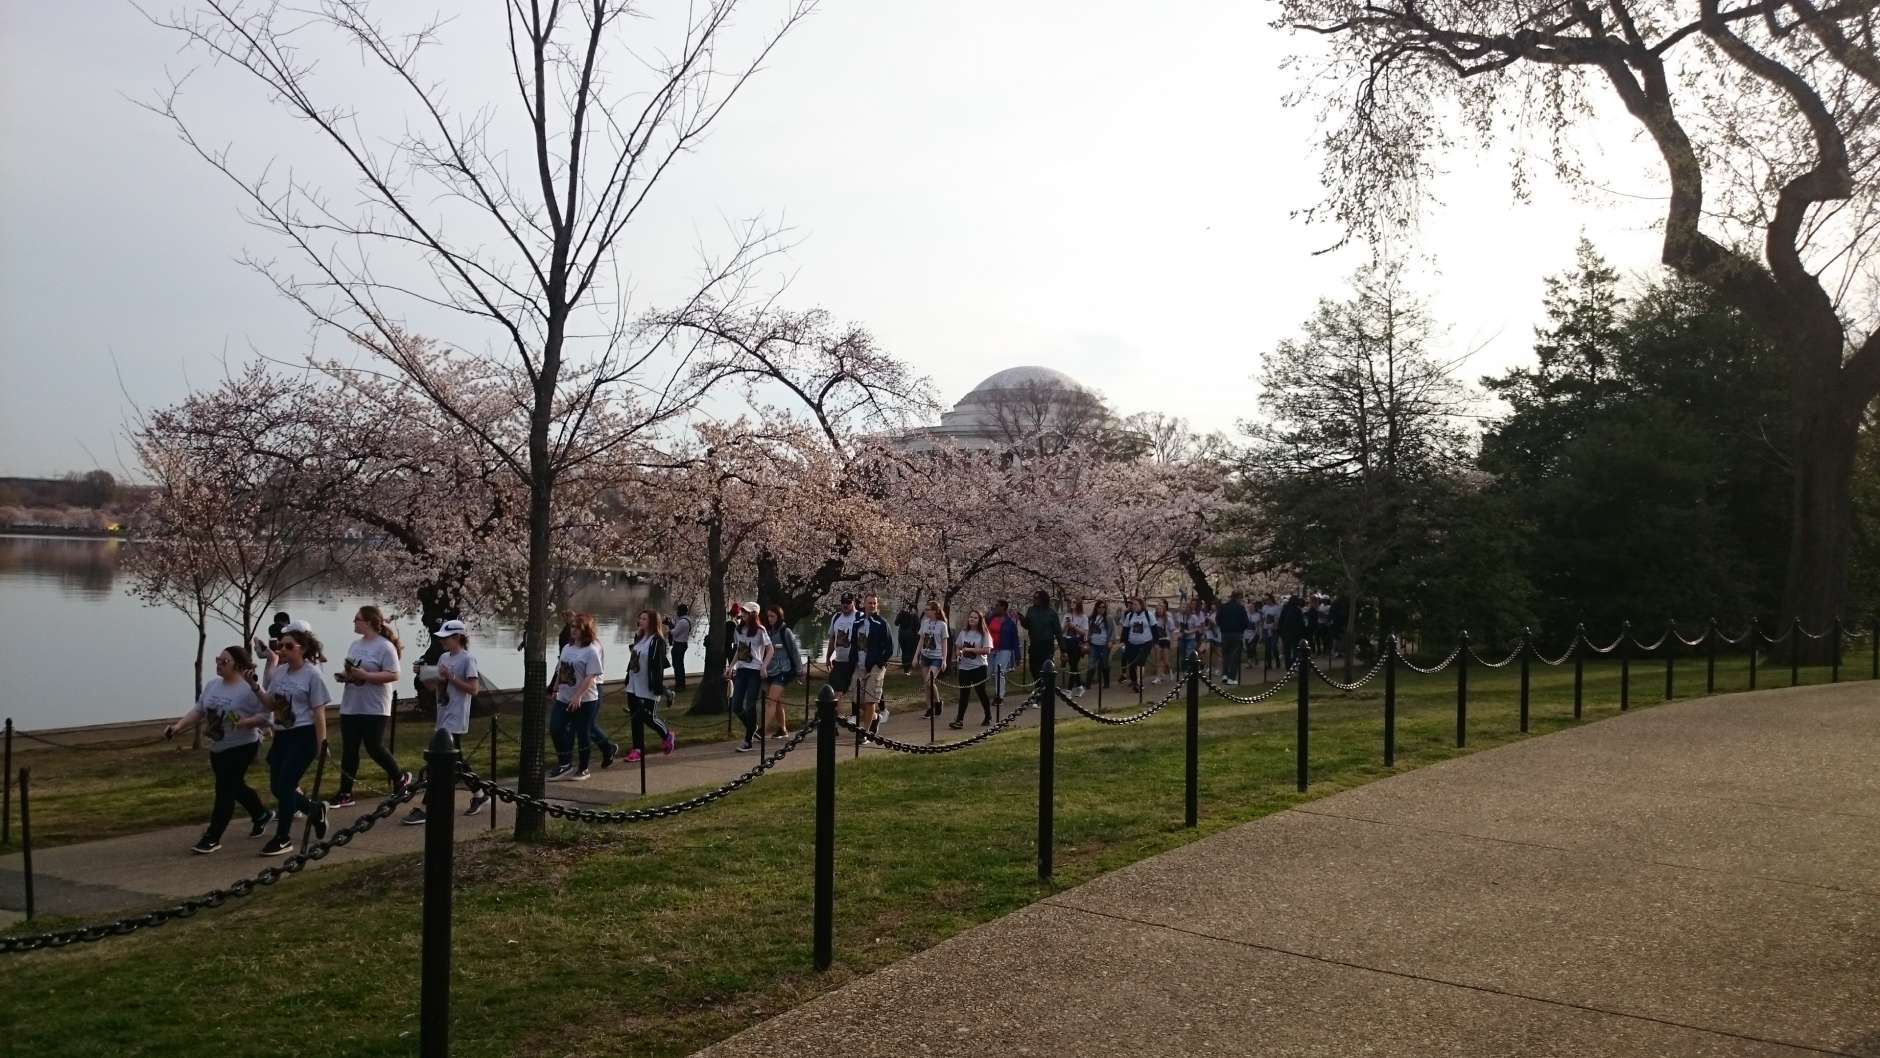 The first Cherry Blossom Festival was held in 1927, and has since expanded. Now, the celebration spans four weekends in March and April, and attracts more than 1.5 million people from all over the world. (WTOP/Dennis Foley)